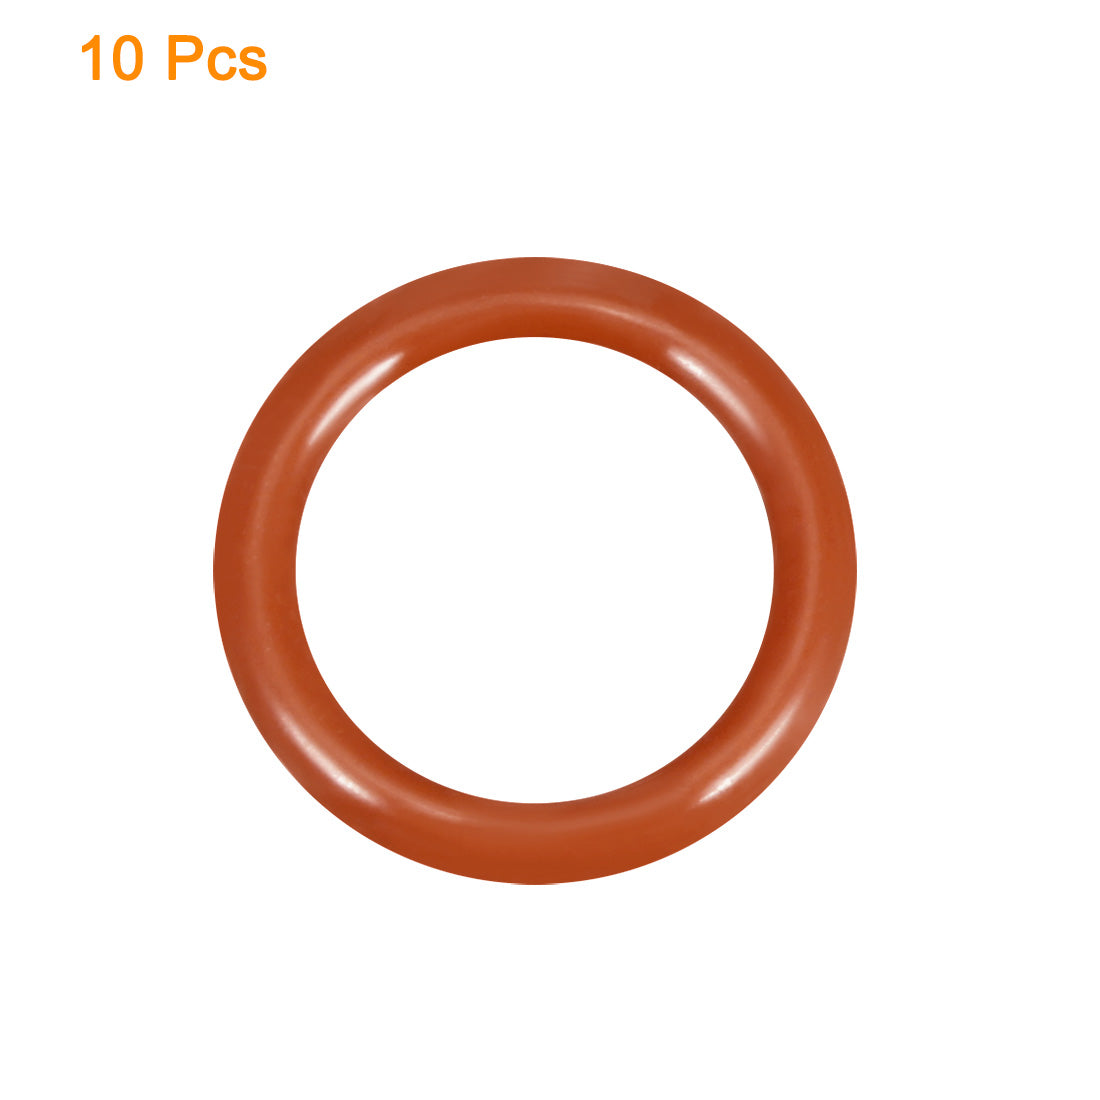 uxcell Uxcell Silicone O-Ring VMQ Seal Rings Sealing Gasket Red 50PCS